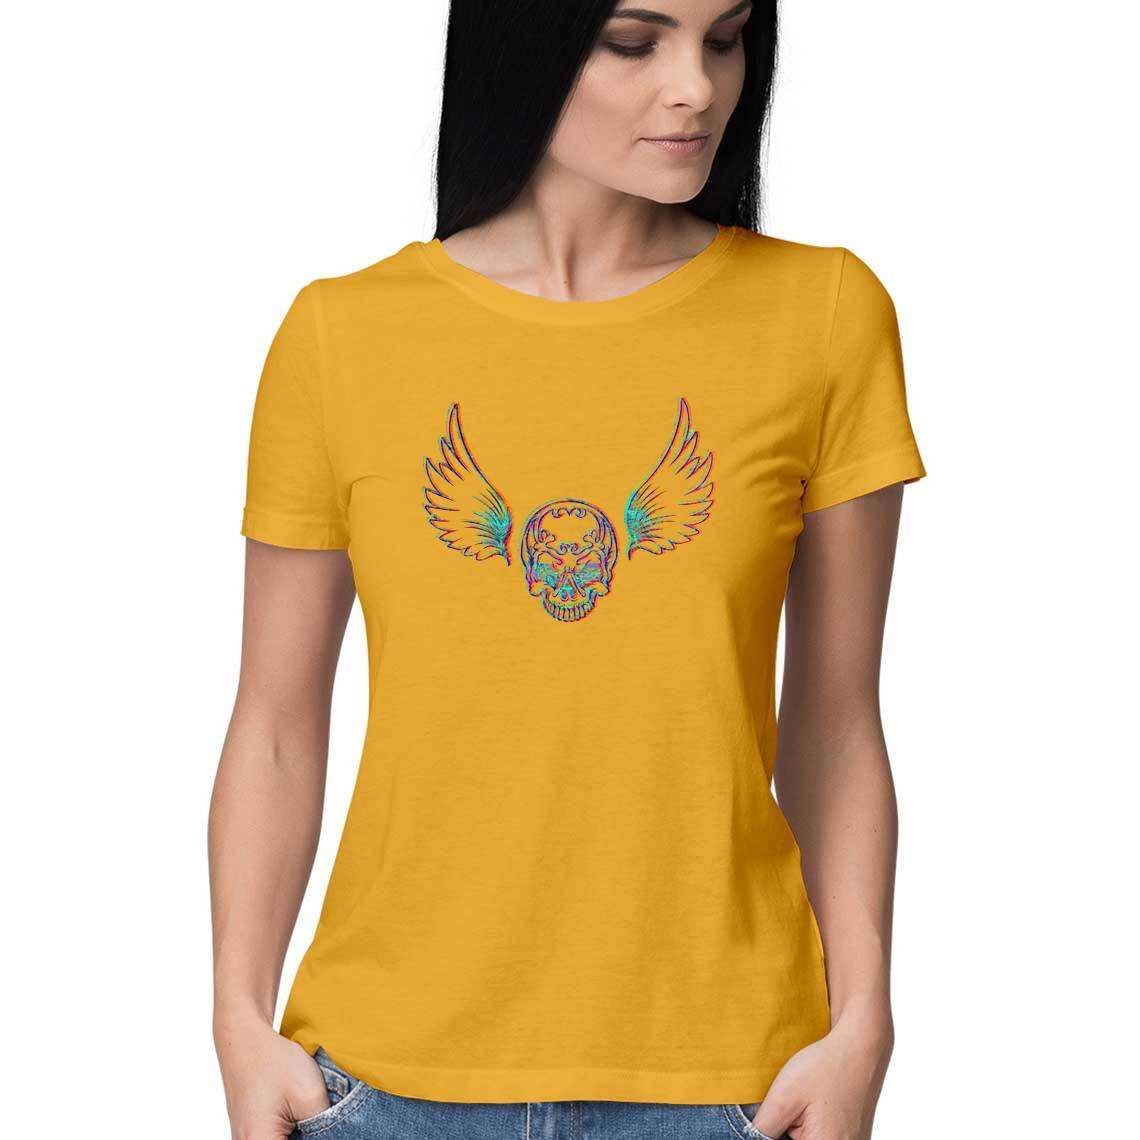 Flying Dead or Dead Women's Graphic T-Shirt - CBD Store India